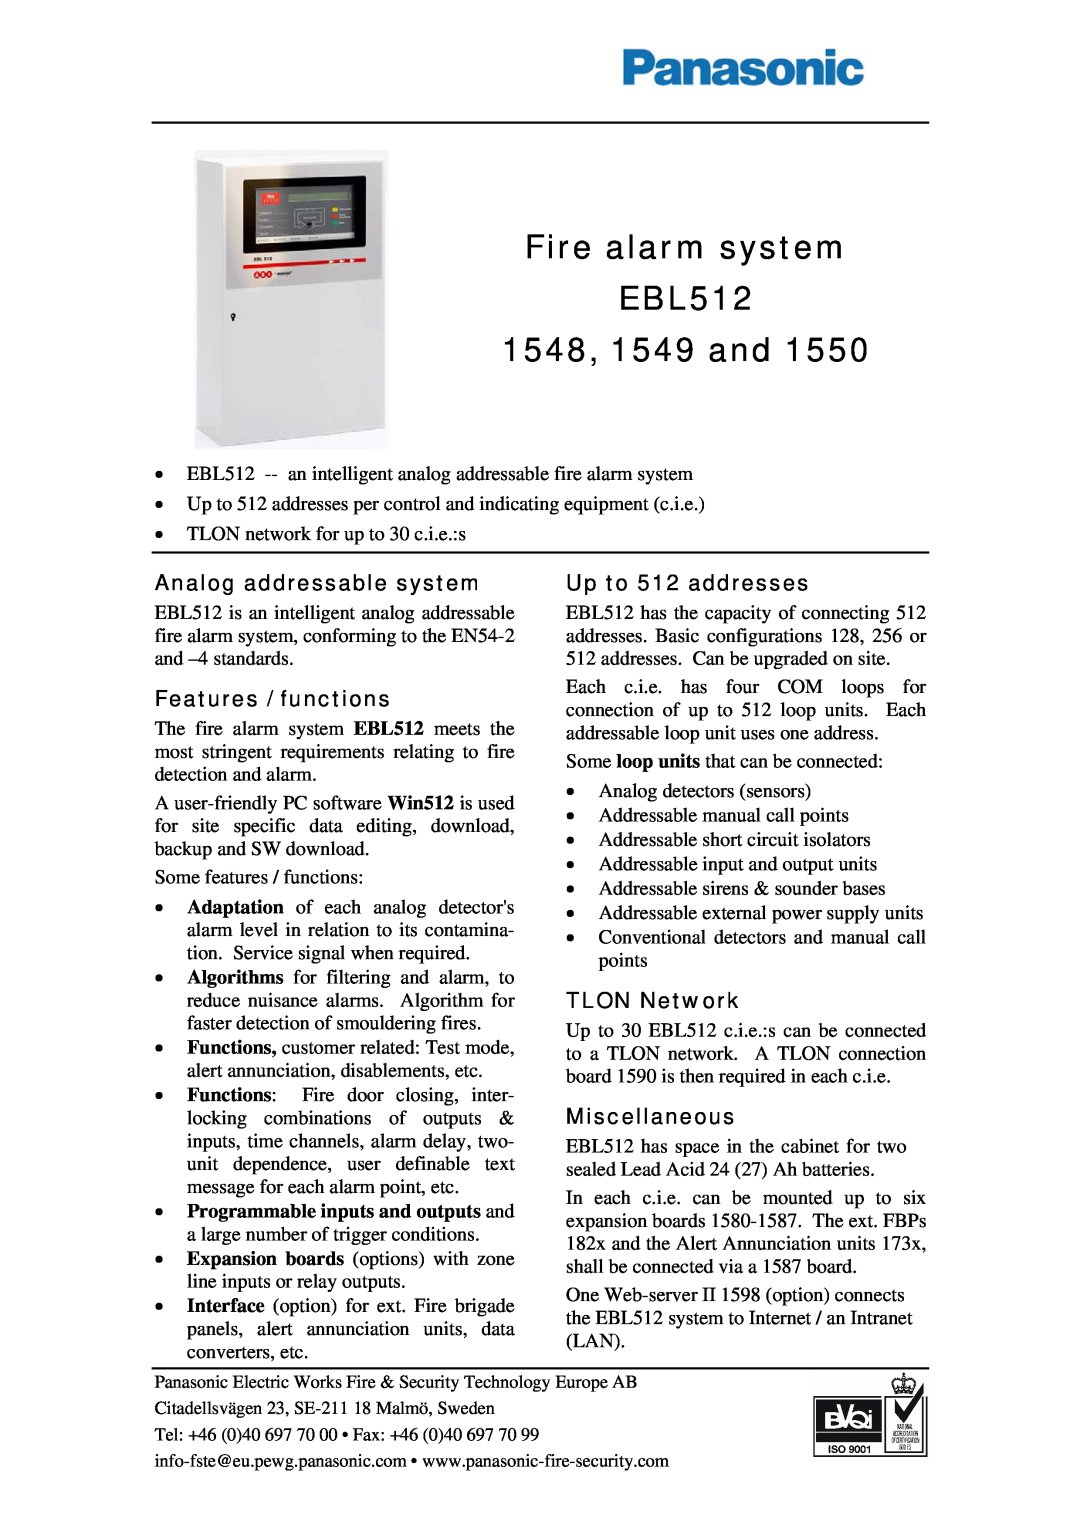 Panasonic 1550 manual Fire alarm system EBL512 1548, 1549 and, Analog addressable system, Features / functions 